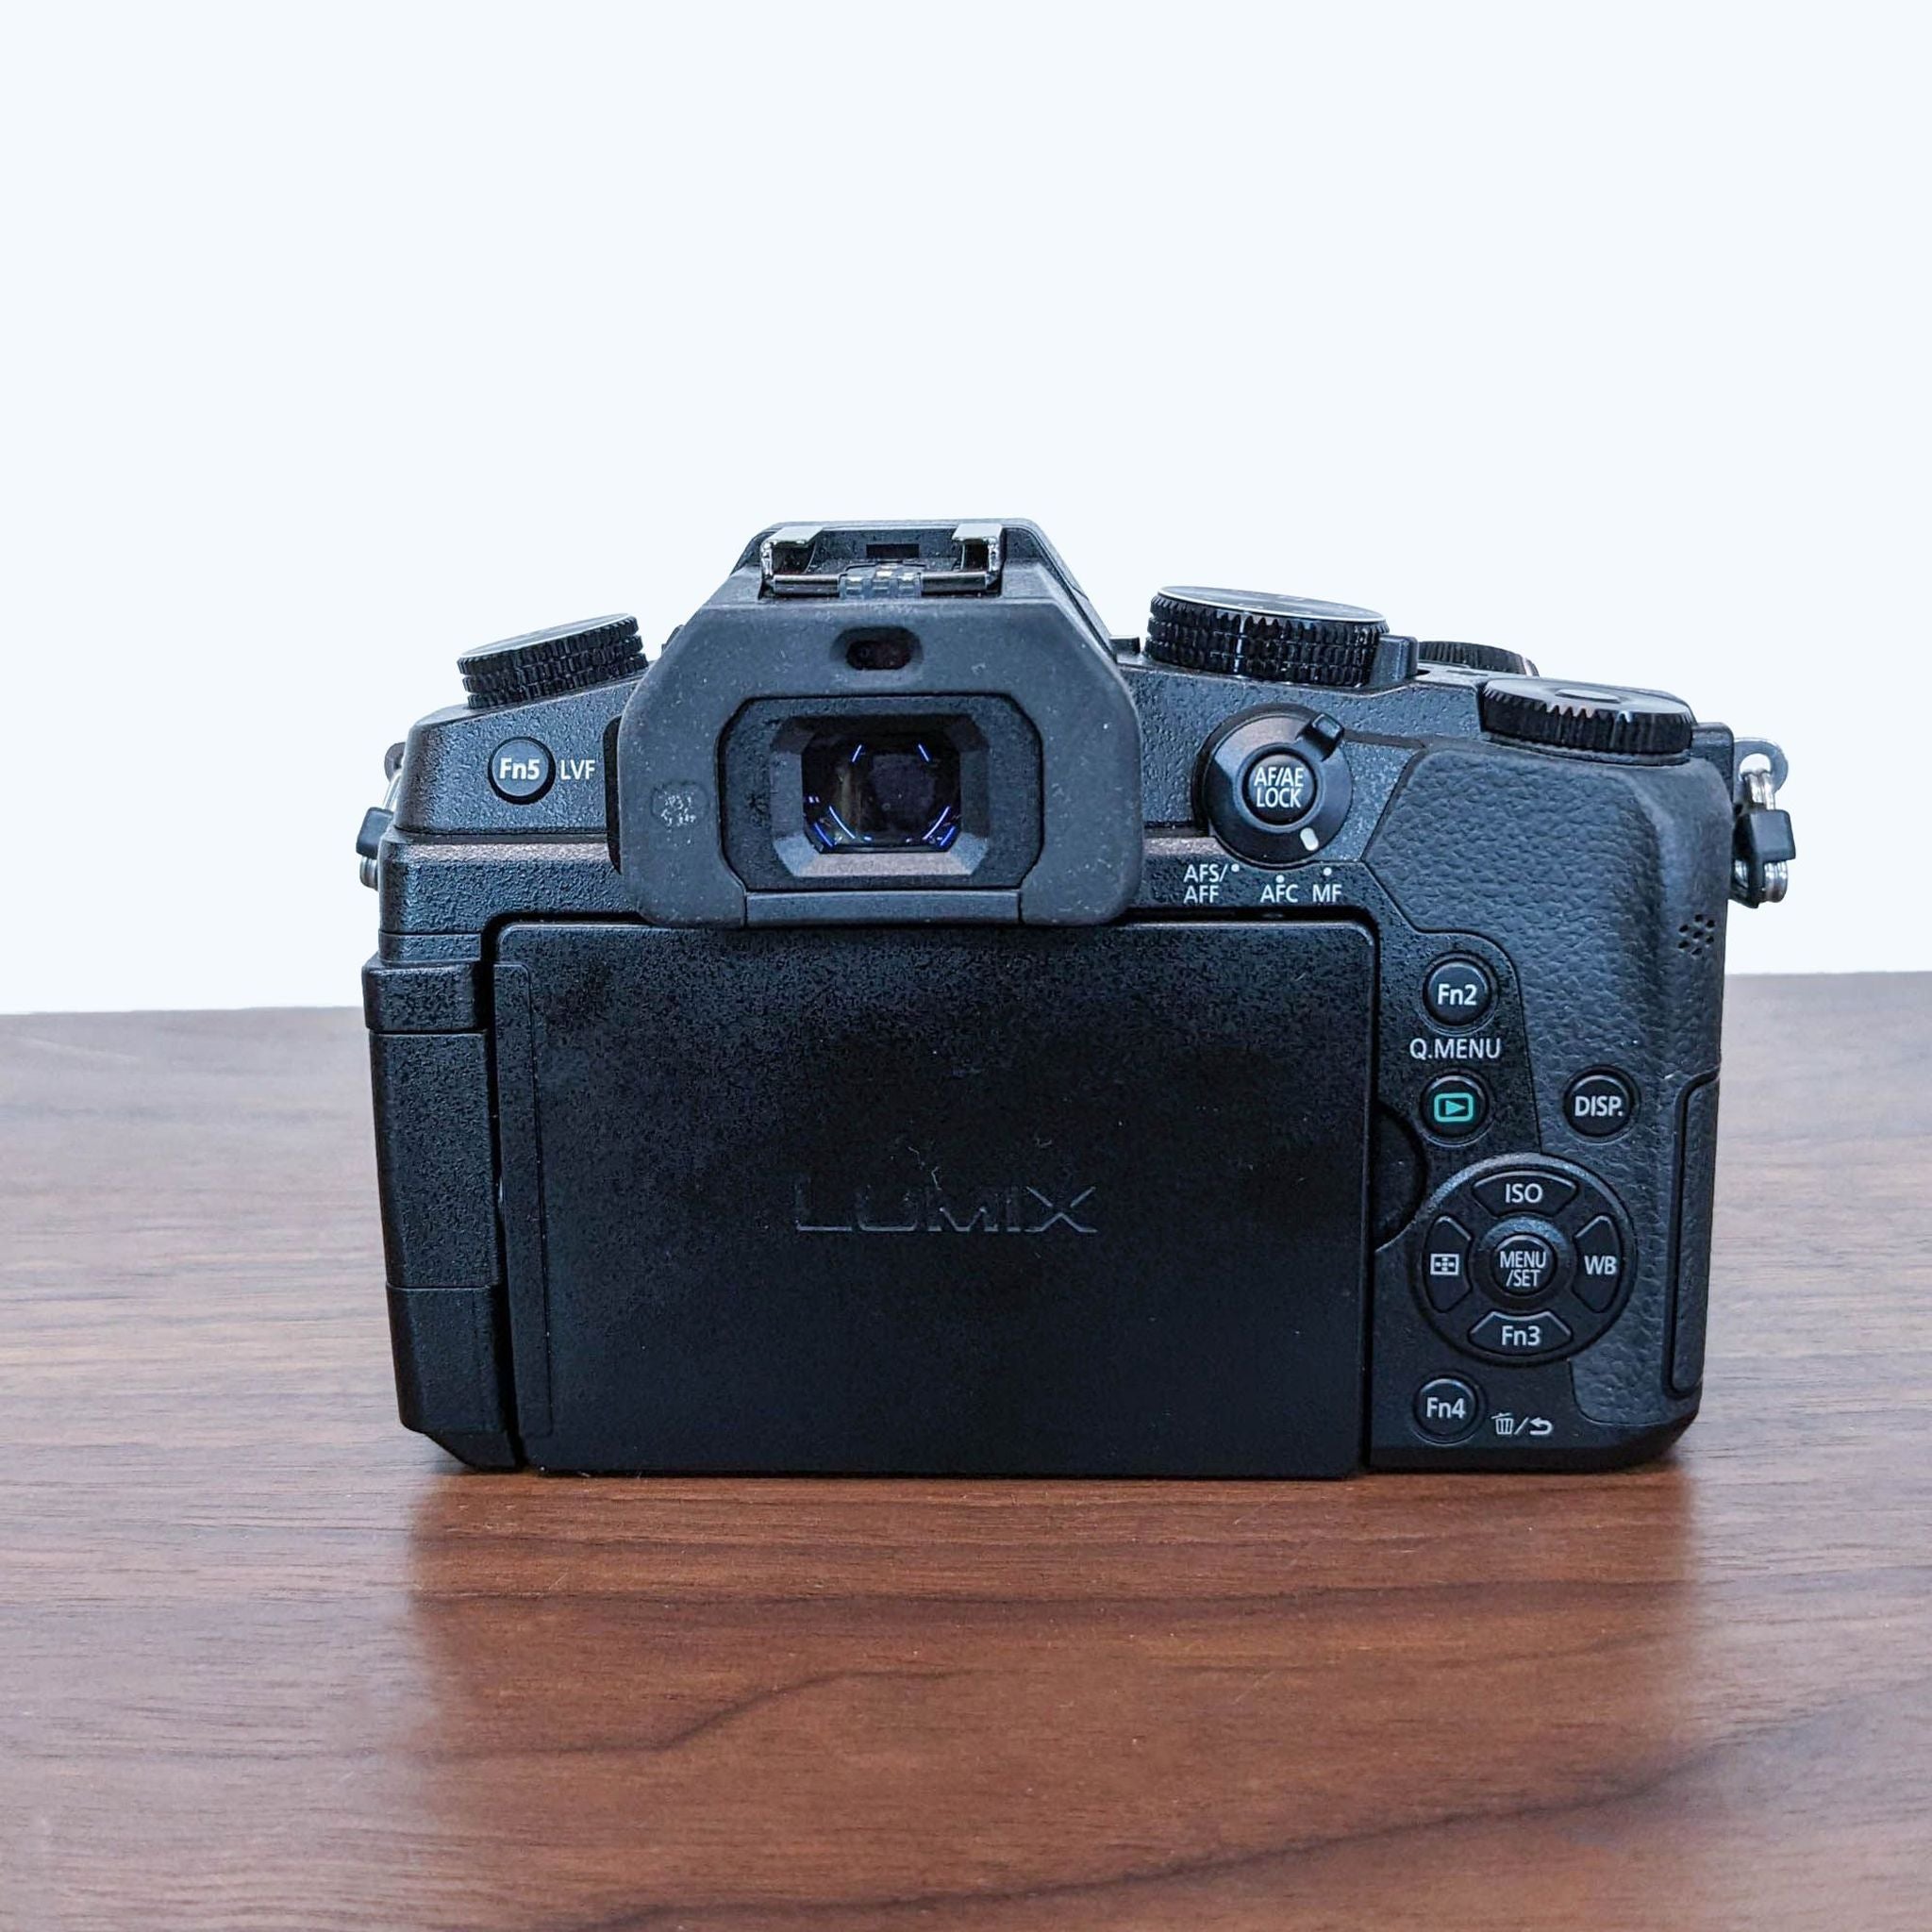 2. Rear view of a Panasonic LUMIX G Mirrorless Camera showing the LCD screen, viewfinder, and control buttons.